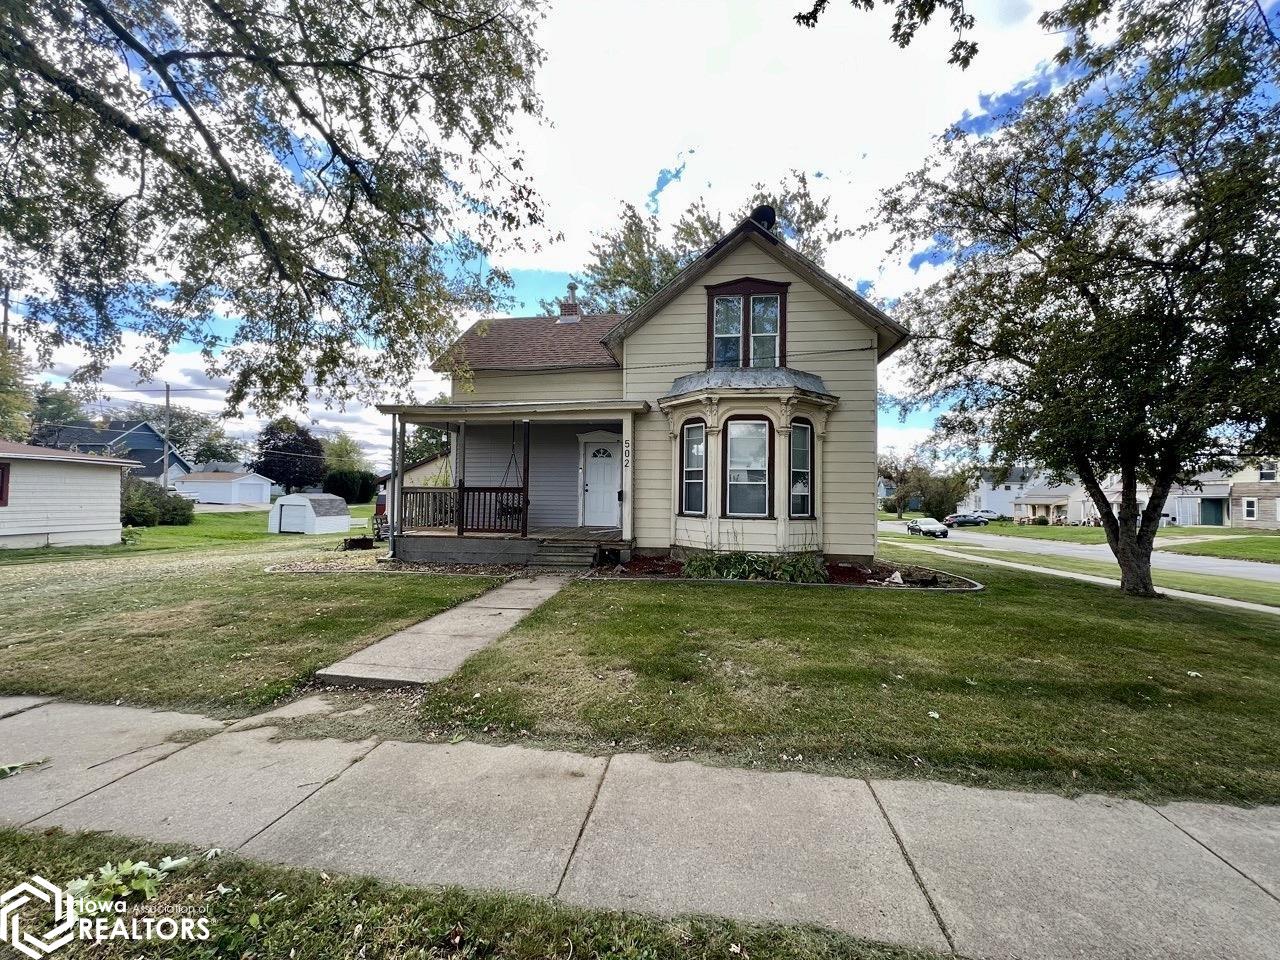 502 5Th, Grinnell, Iowa 50112, 3 Bedrooms Bedrooms, ,1 BathroomBathrooms,Single Family,For Sale,5Th,6315837